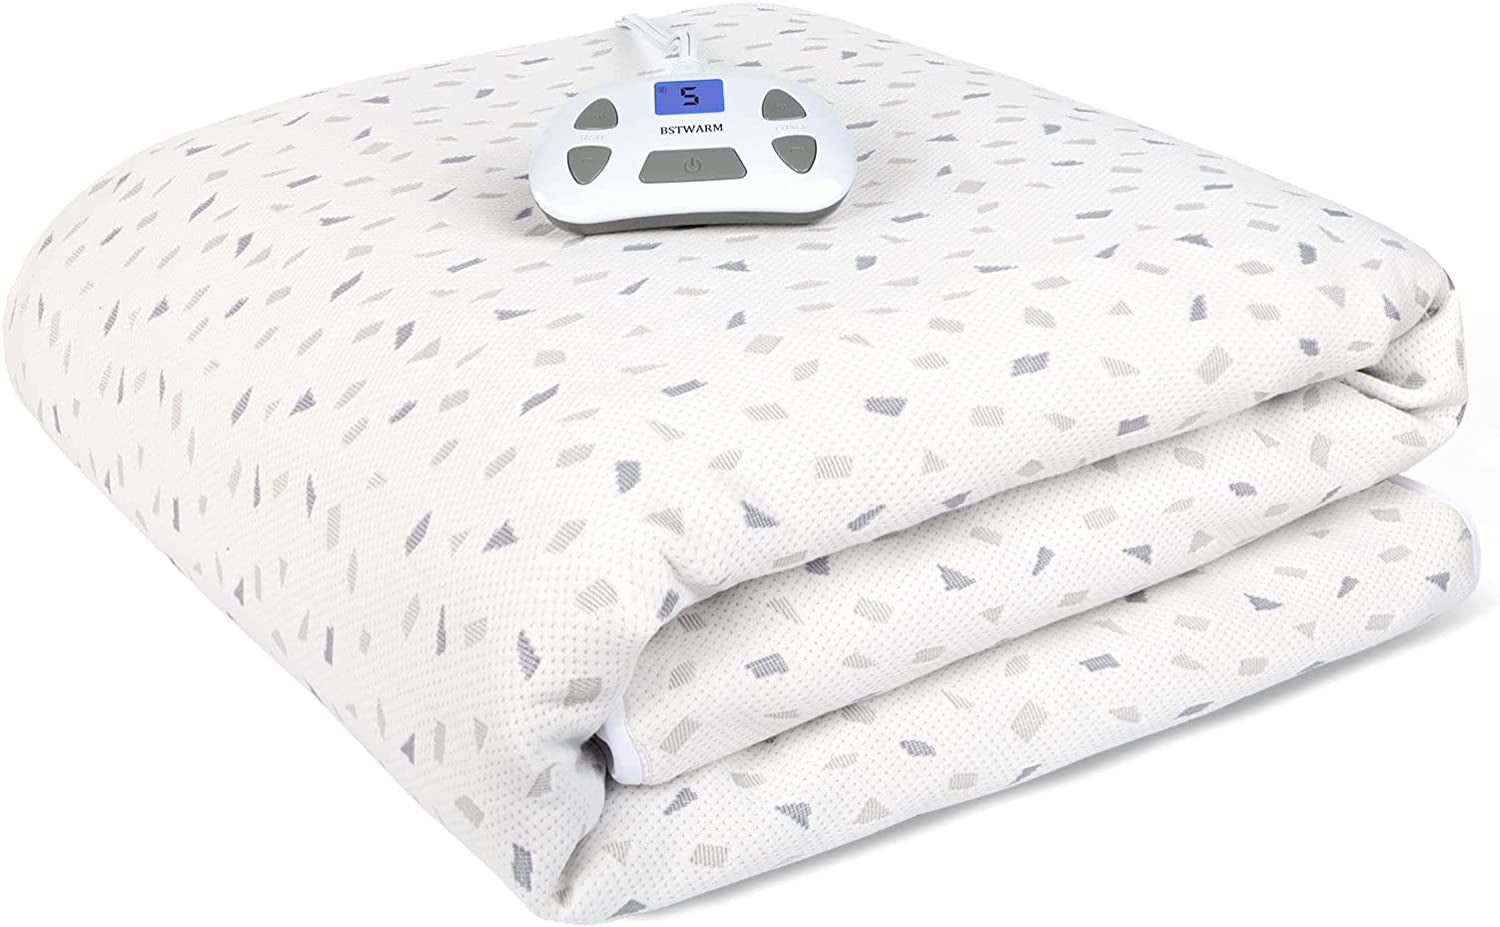 BSTWARM Heated Mattress Pad, Electric Bed Warmer, Mattress Cover with 8-21" Deep Pocket, 10 Heat Settings, 1-12 Hours Timed Off, Machine Washable - Queen 60''X80'', Dual Control